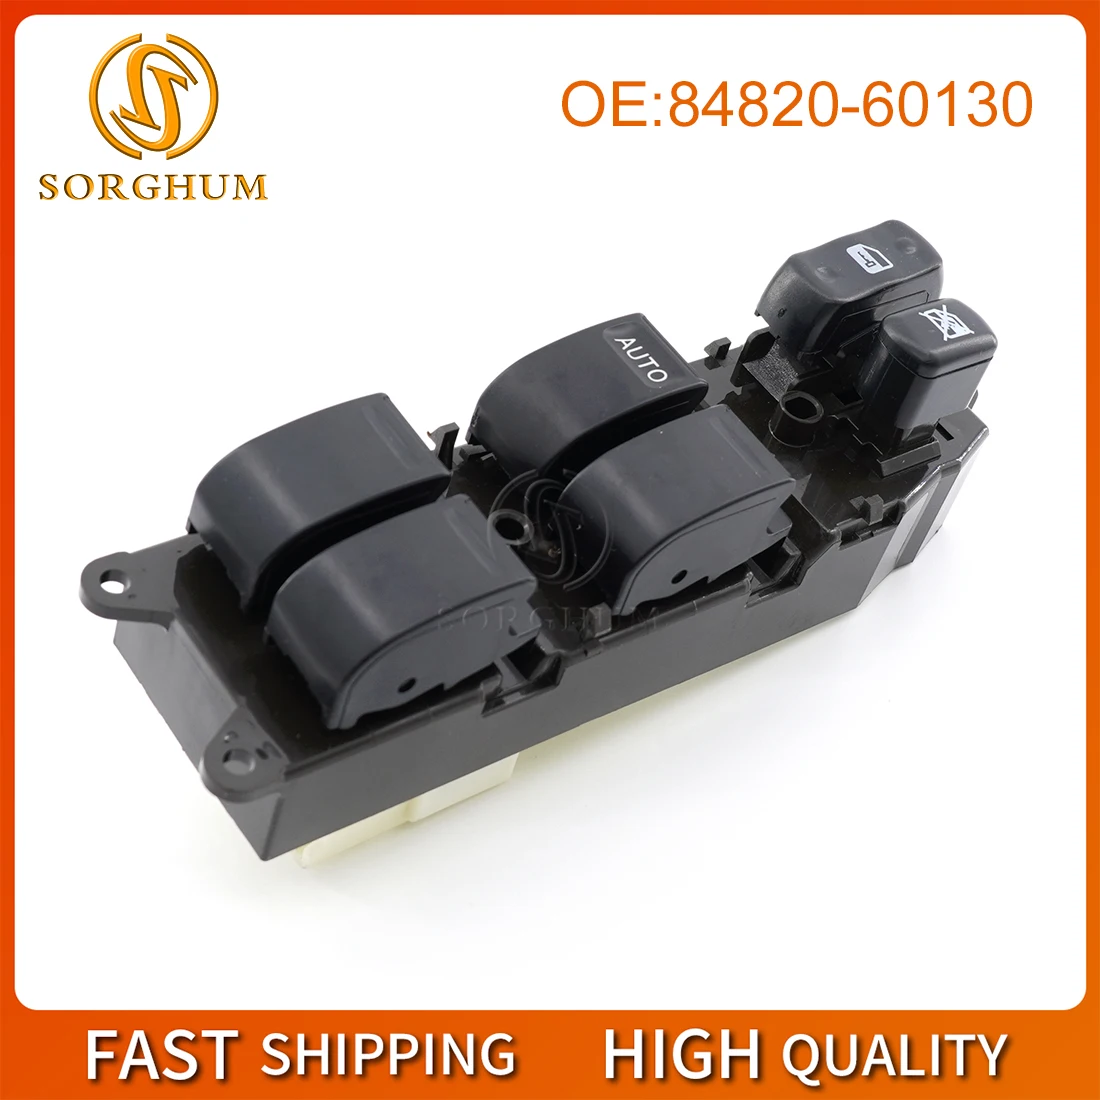 

Sorghum 84820-60130 Front Left Power Window Lifter Master Switch For Toyota Land Cruiser 4.7L 1998-2002 84820-42060 84820-60110